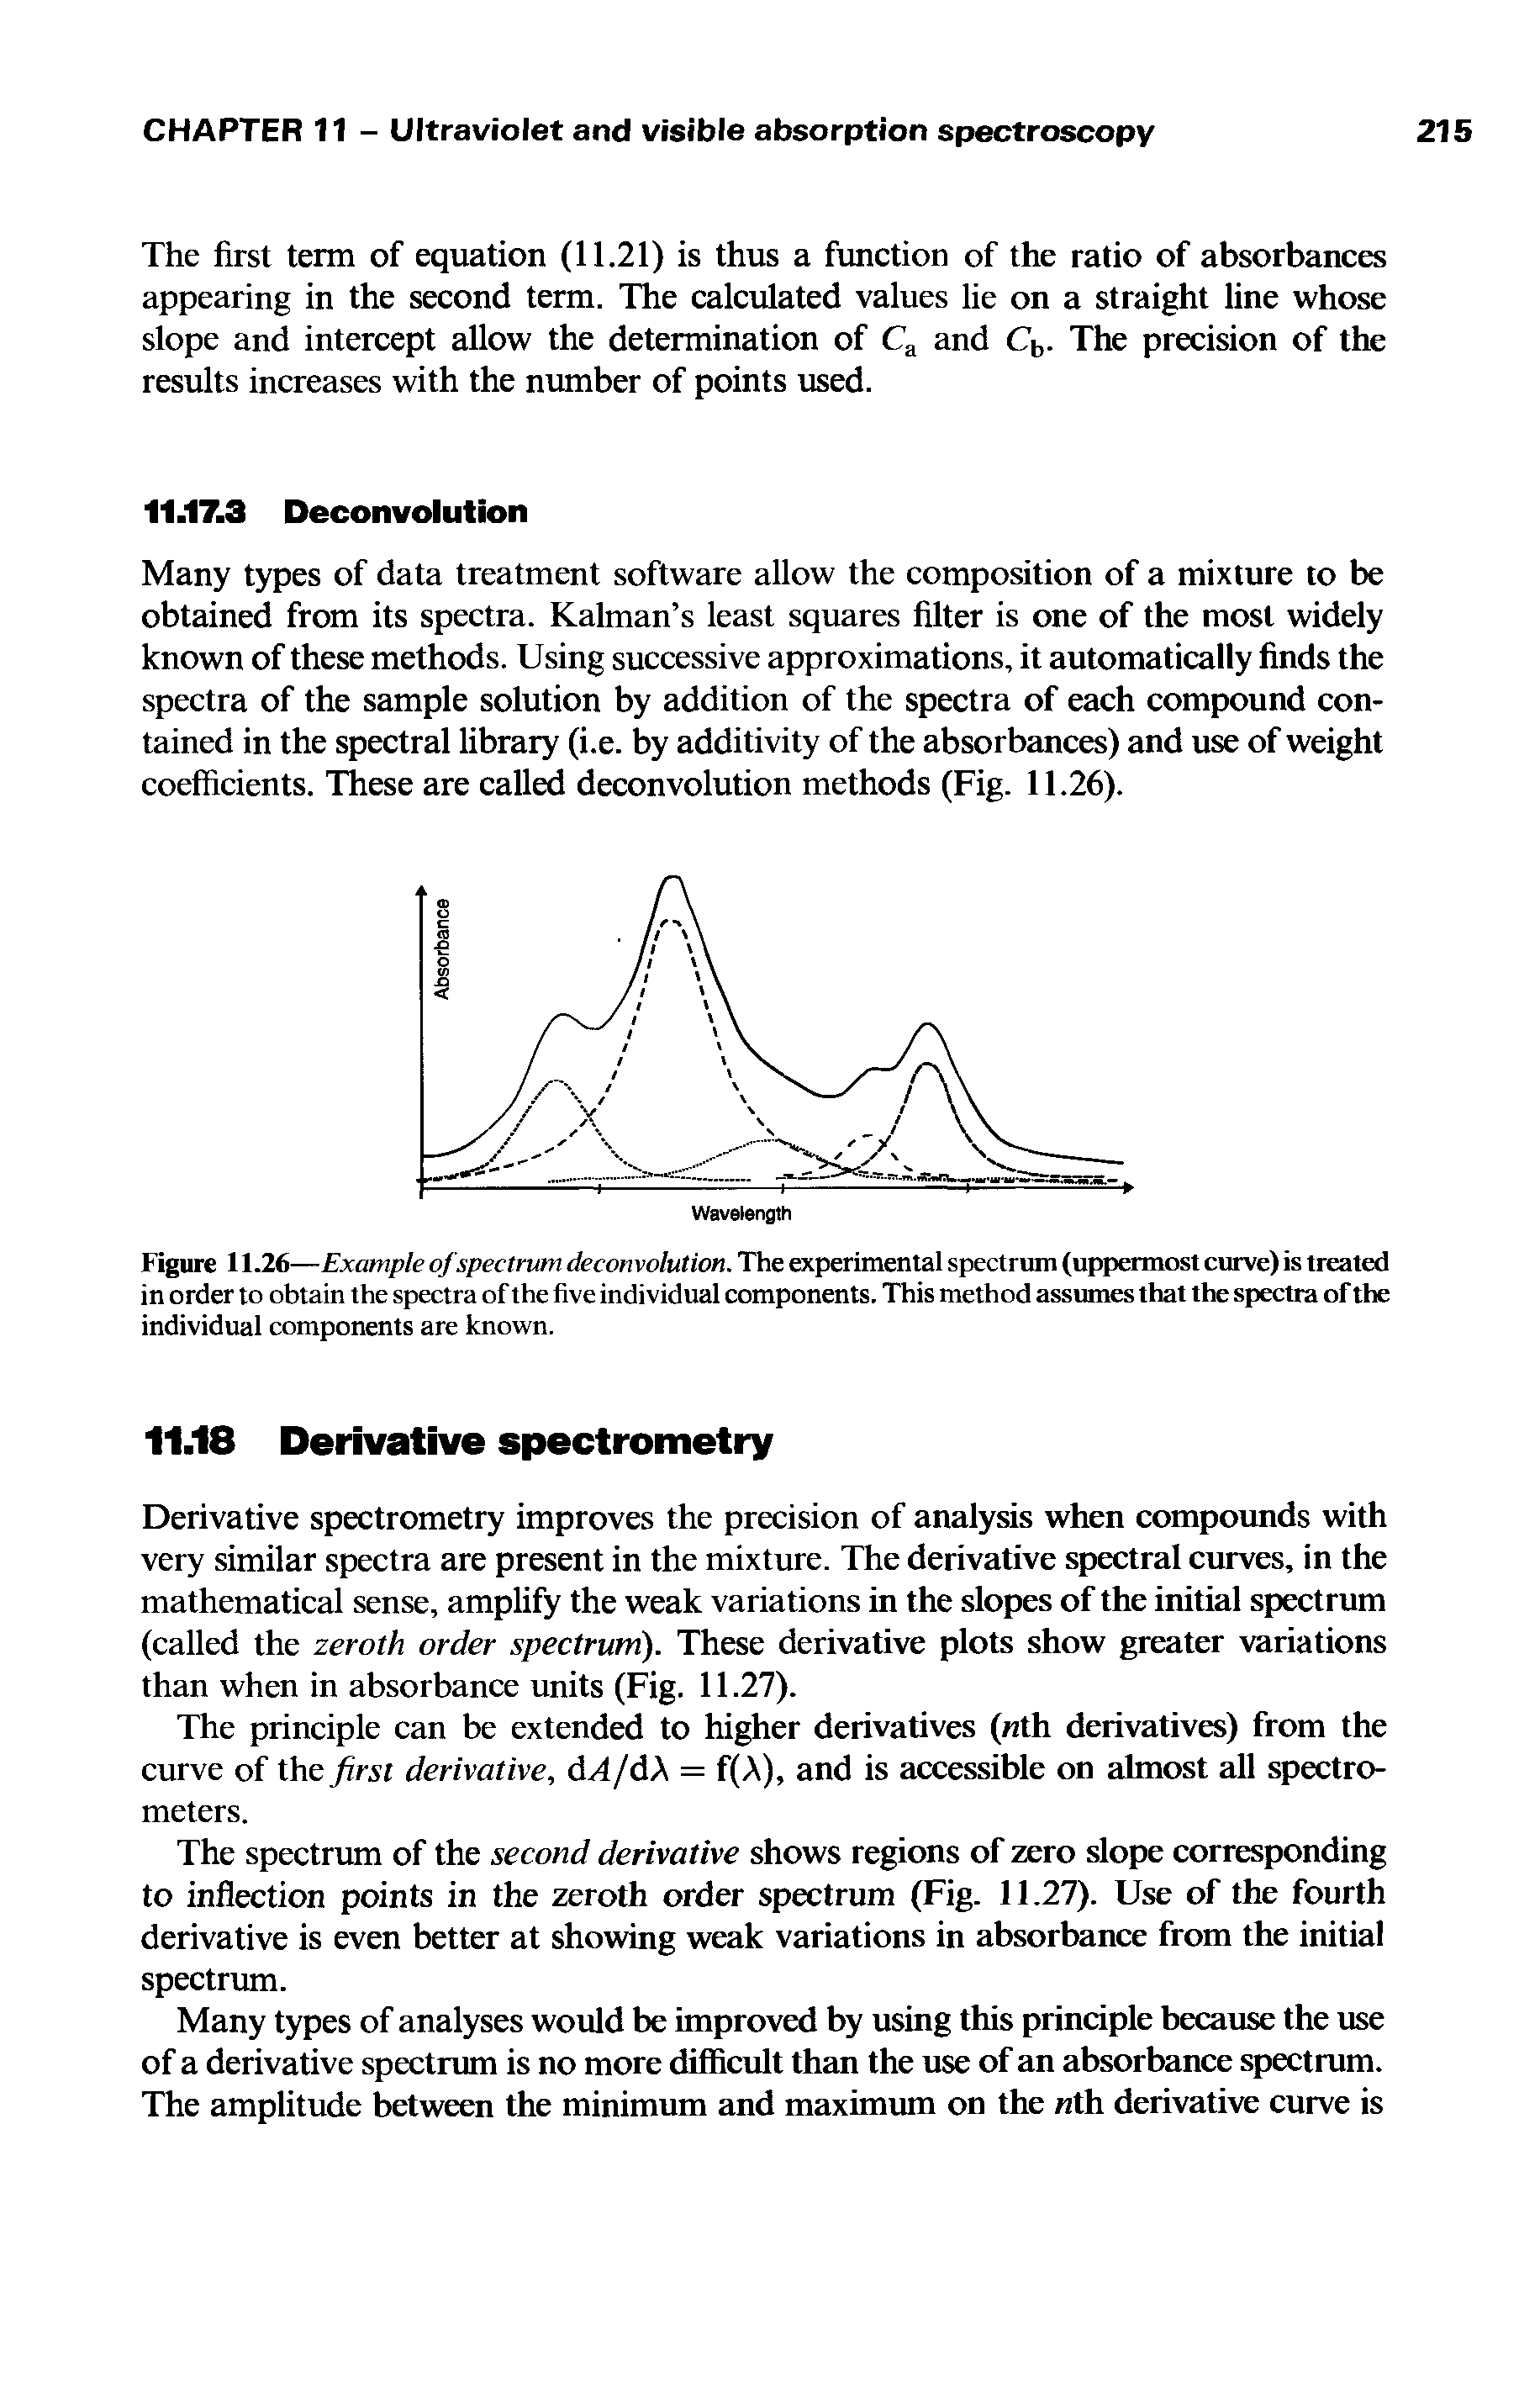 Figure 11.26—Example of spectrum deconvolution. The experimental spectrum (uppermost curve) is treated in order to obtain the spectra of the five individual components. This method assumes that the spectra of the individual components are known.